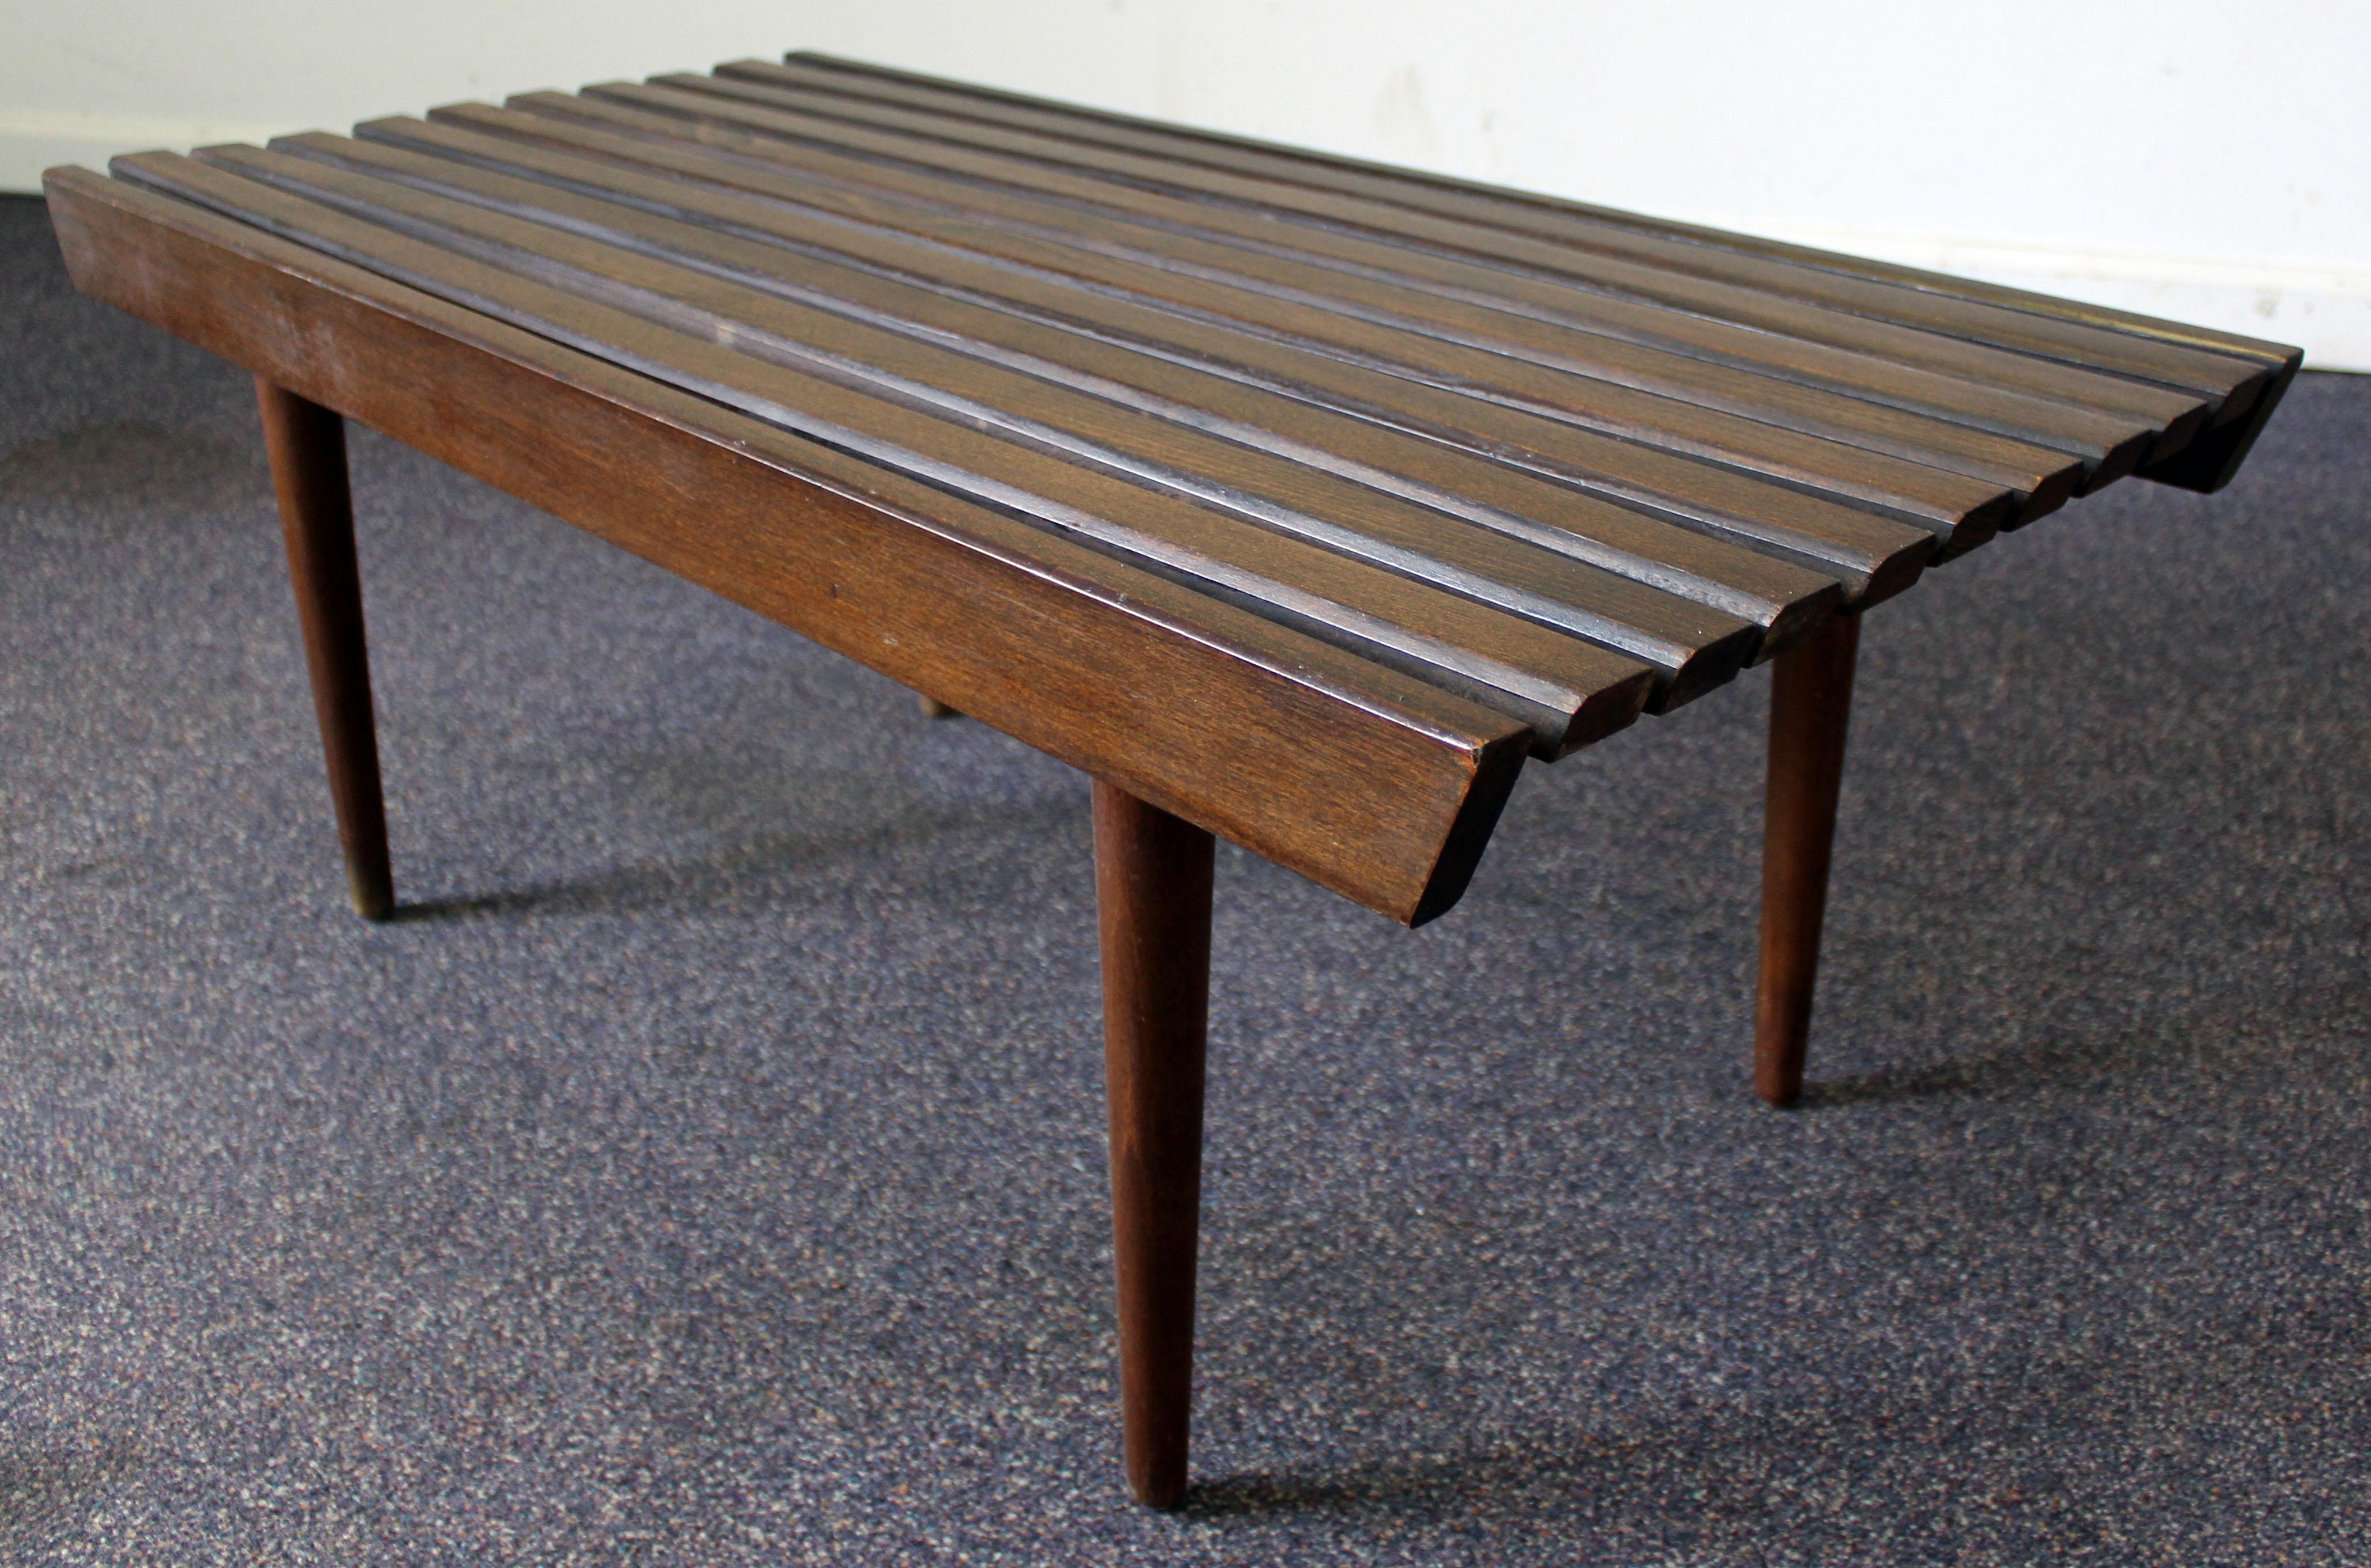 What a find. Offered is a Mid-Century Modern slat bench coffee table. It has a nice look with simple lines. The piece is made of walnut, shows minor wear. It is not signed.

Measures: 36